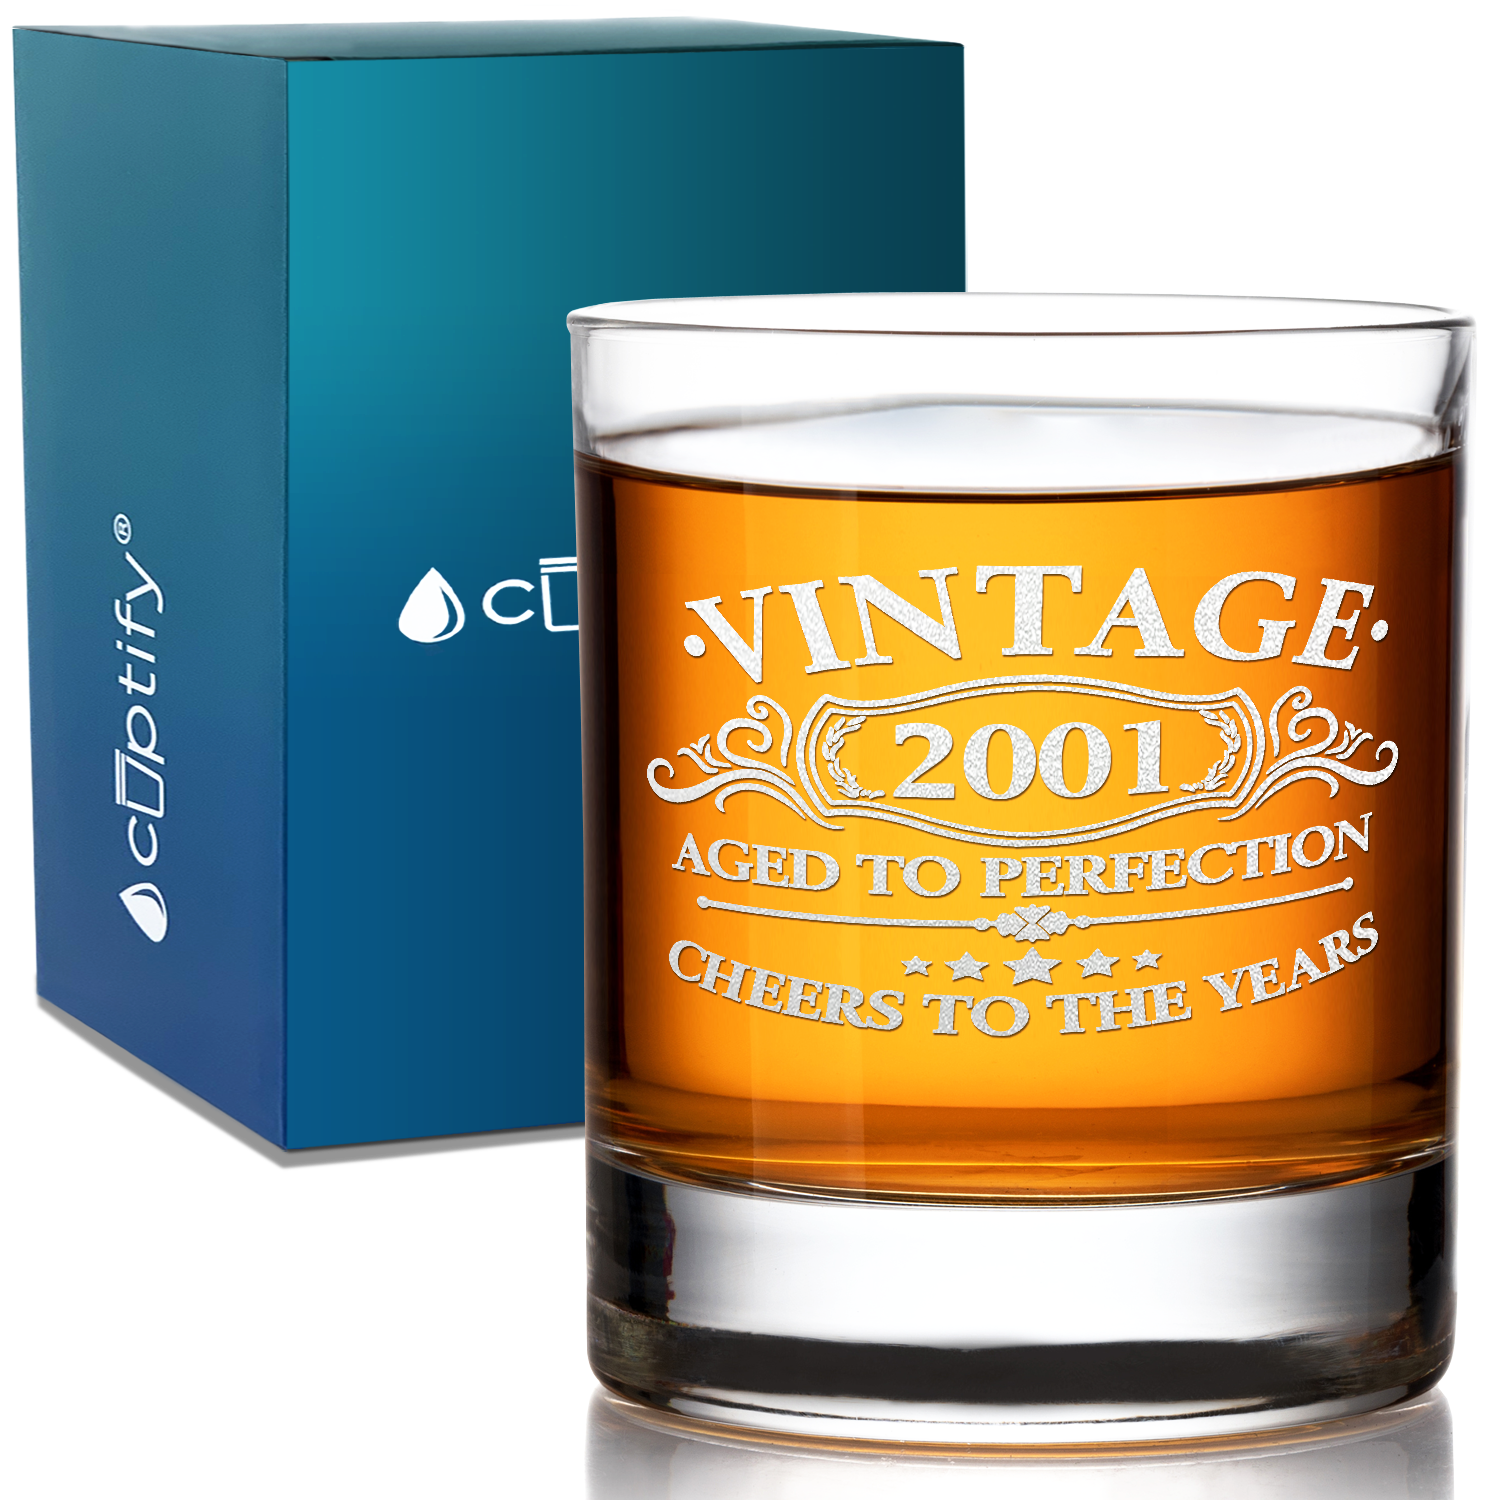 Vintage Aged To Perfection Cheers To 20 Years 2001 Laser Engraved on 10.25oz Old Fashion Glass